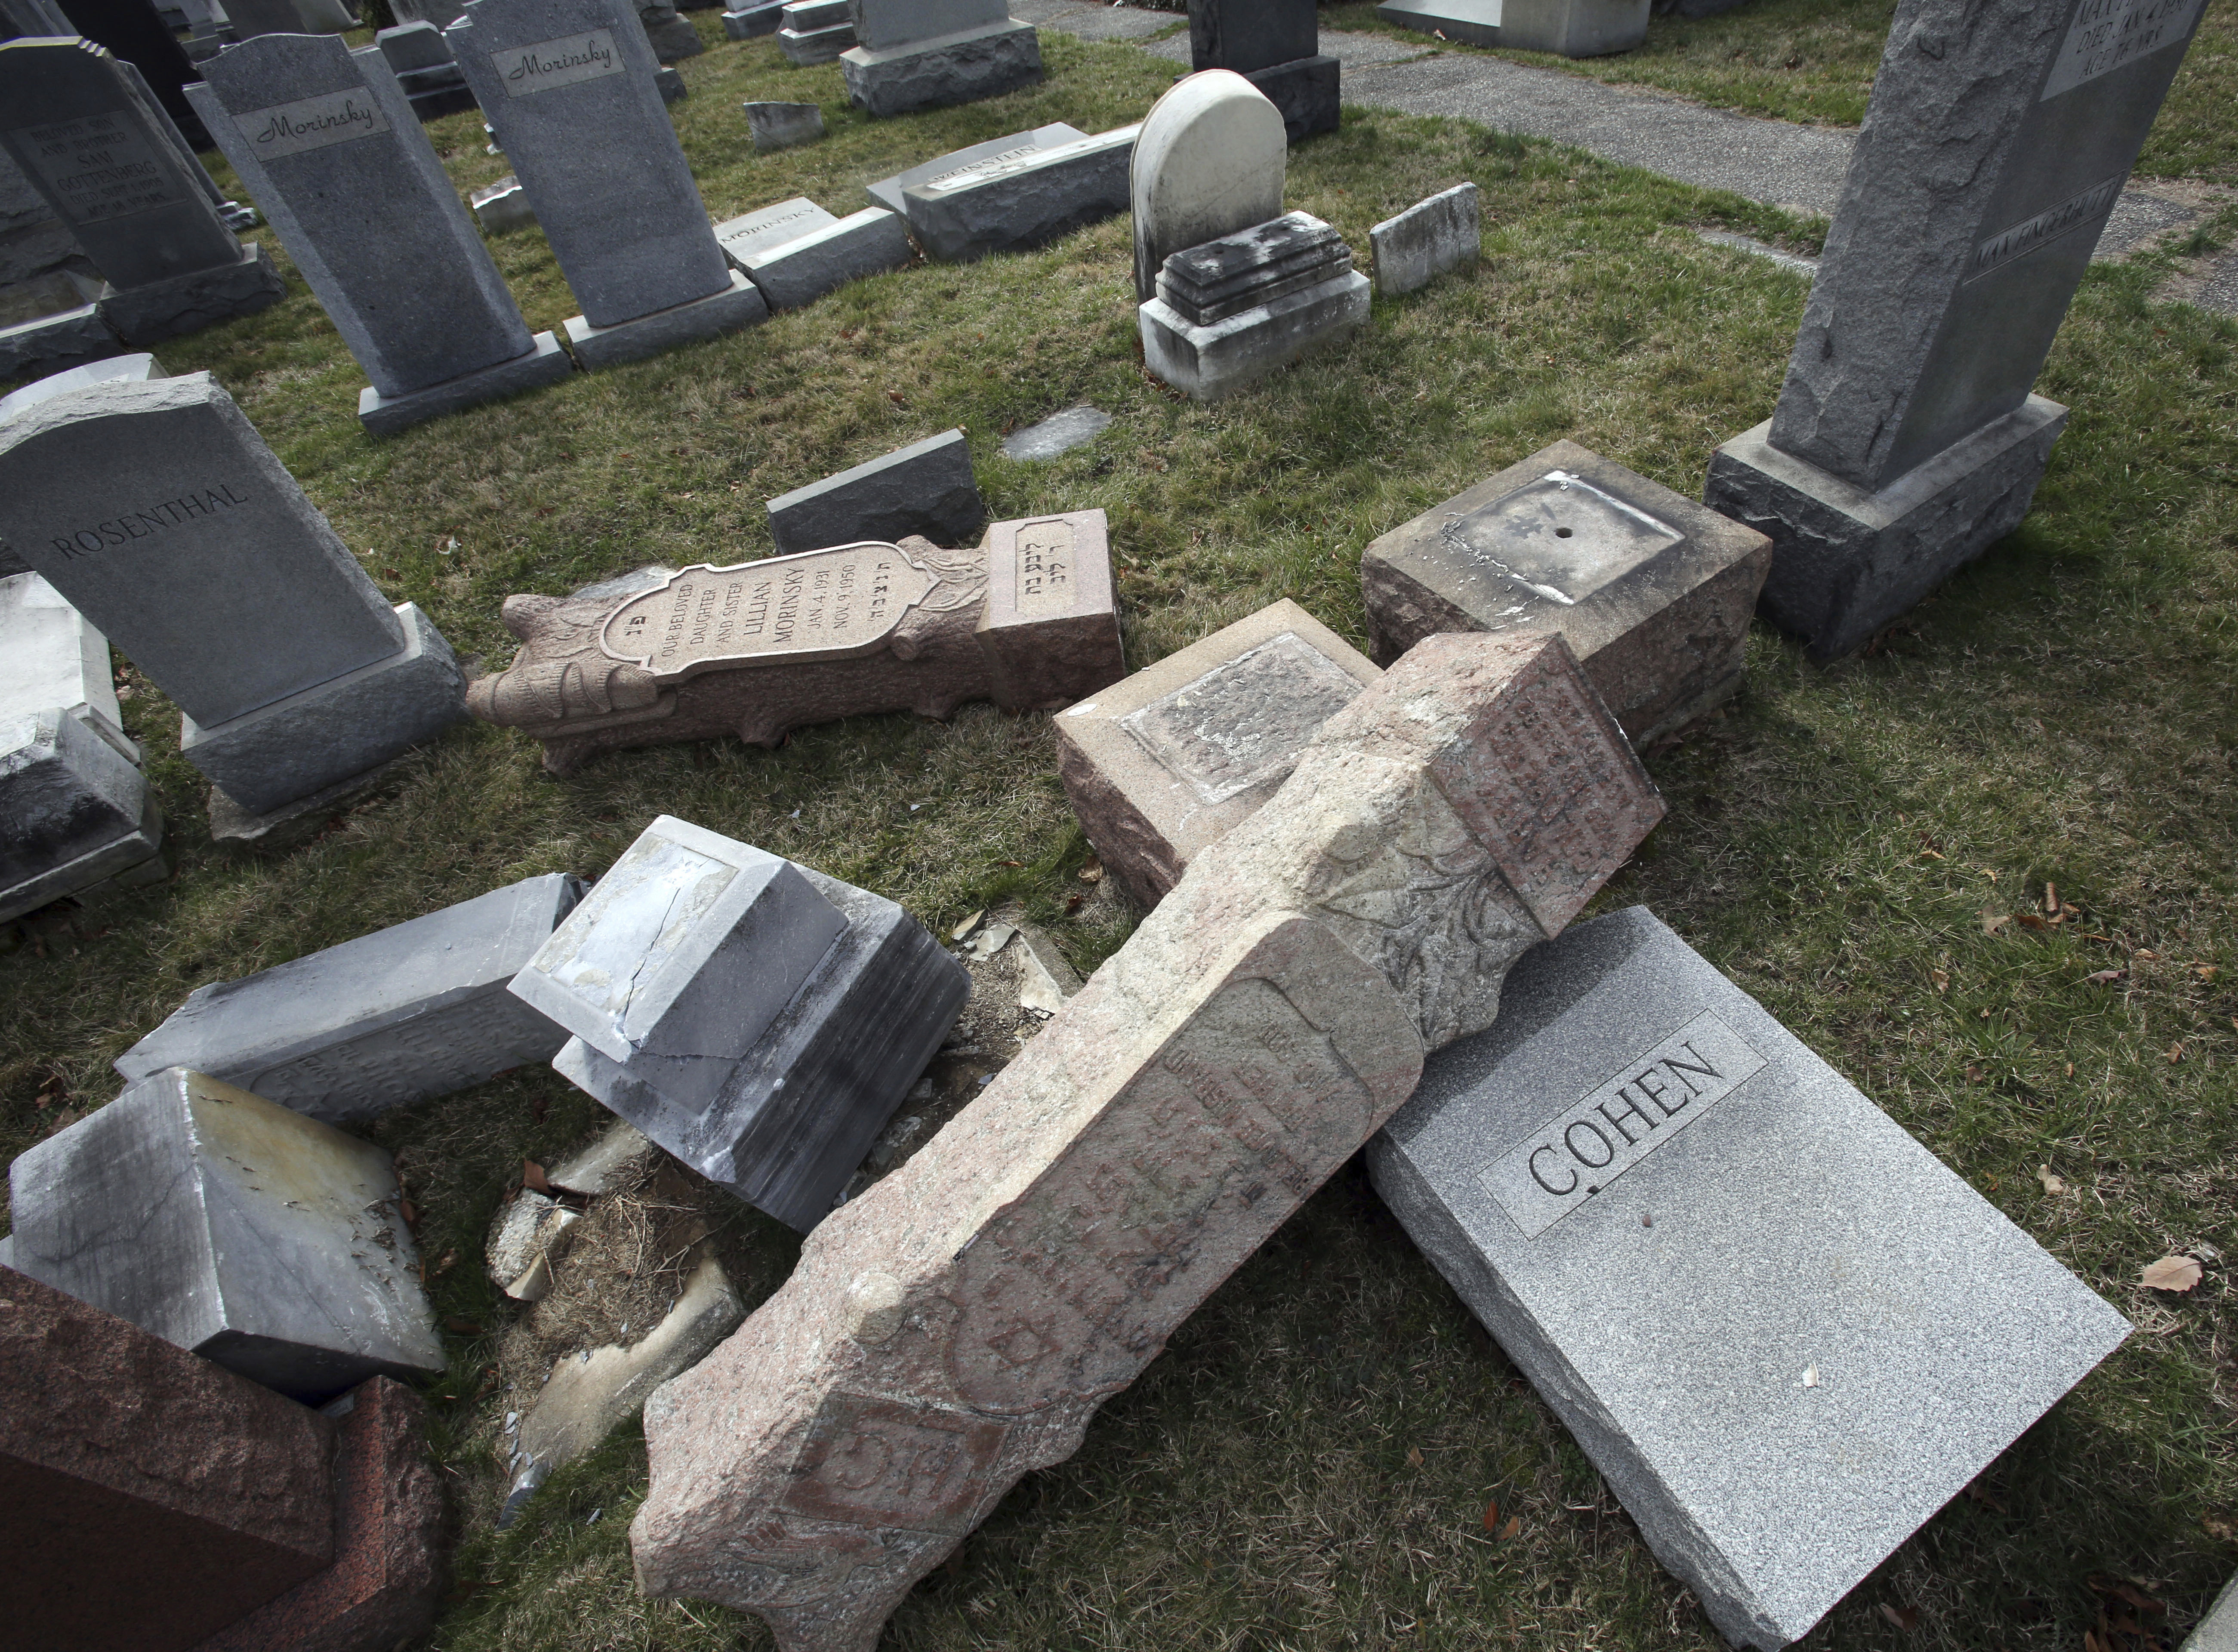 Damaged headstones rest on the ground at Mount Carmel Cemetery on Monday, Feb. 27, 2017, in Philadelphia. More than 100 headstones have been vandalized at the Jewish cemetery in Philadelphia, damage discovered less than a week after similar vandalism in Missouri, authorities said. (AP Photo/Jacqueline Larma)